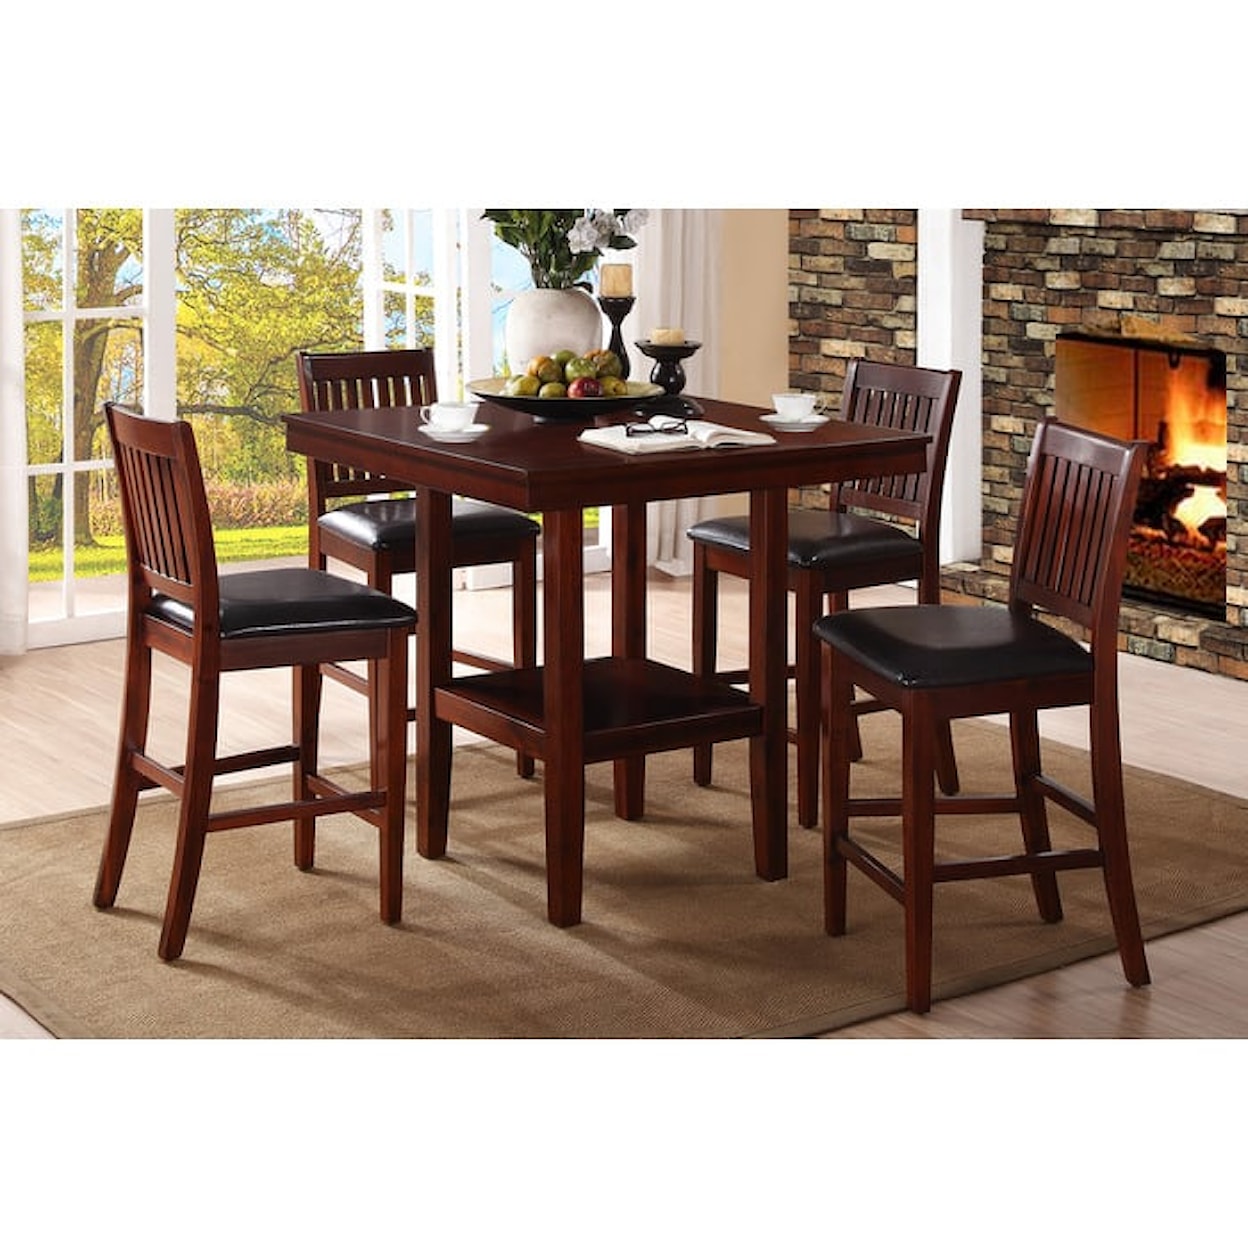 Homelegance Galena 5050 5 Piece Counter Height Table & Chair Set